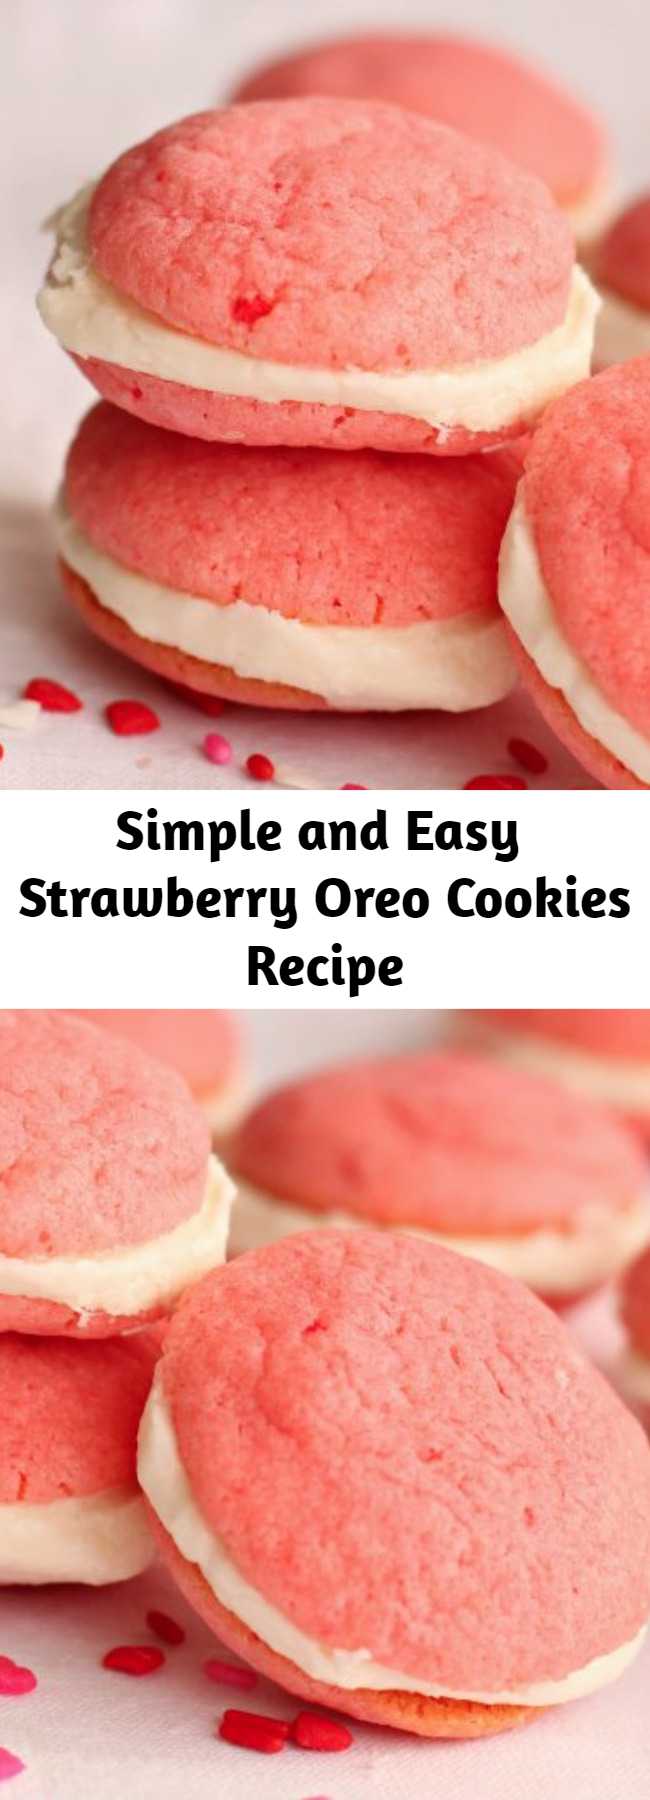 Simple and Easy Strawberry Oreo Cookies Recipe - These Strawberry Oreo Cookies are easy to make and full of delicious strawberry flavor. You are going to love these yummy and simple cookies.